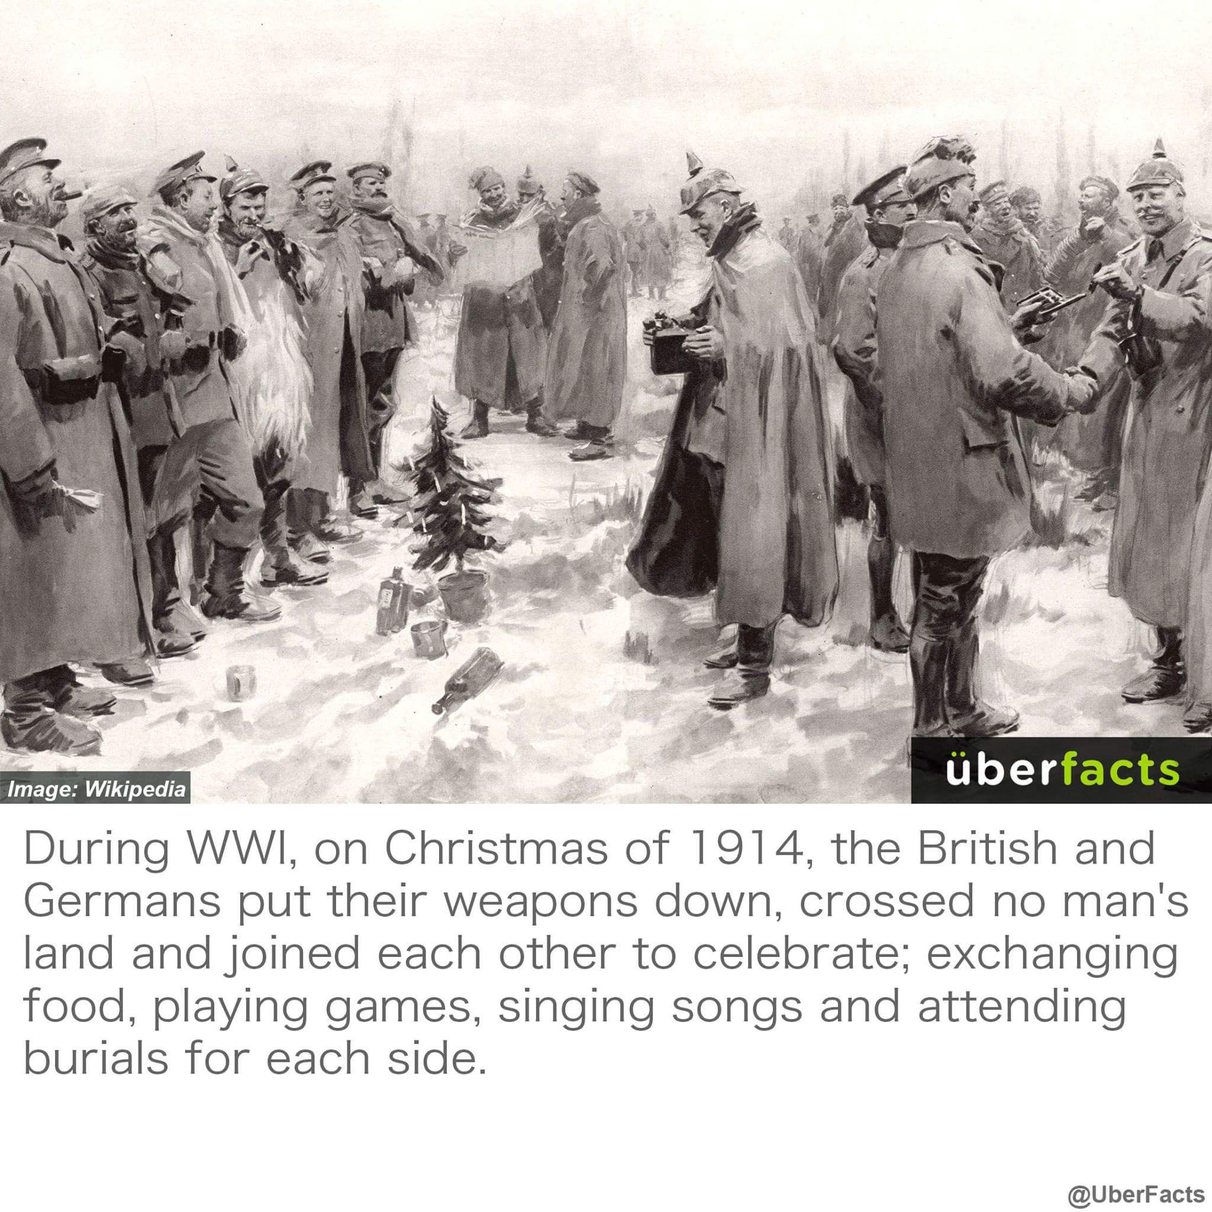 after the truce ended they refused to fight each other so they were changed up to different positions on the front.... Next christmas the truce wasnt this friendly, they just sat in their trenches - meme